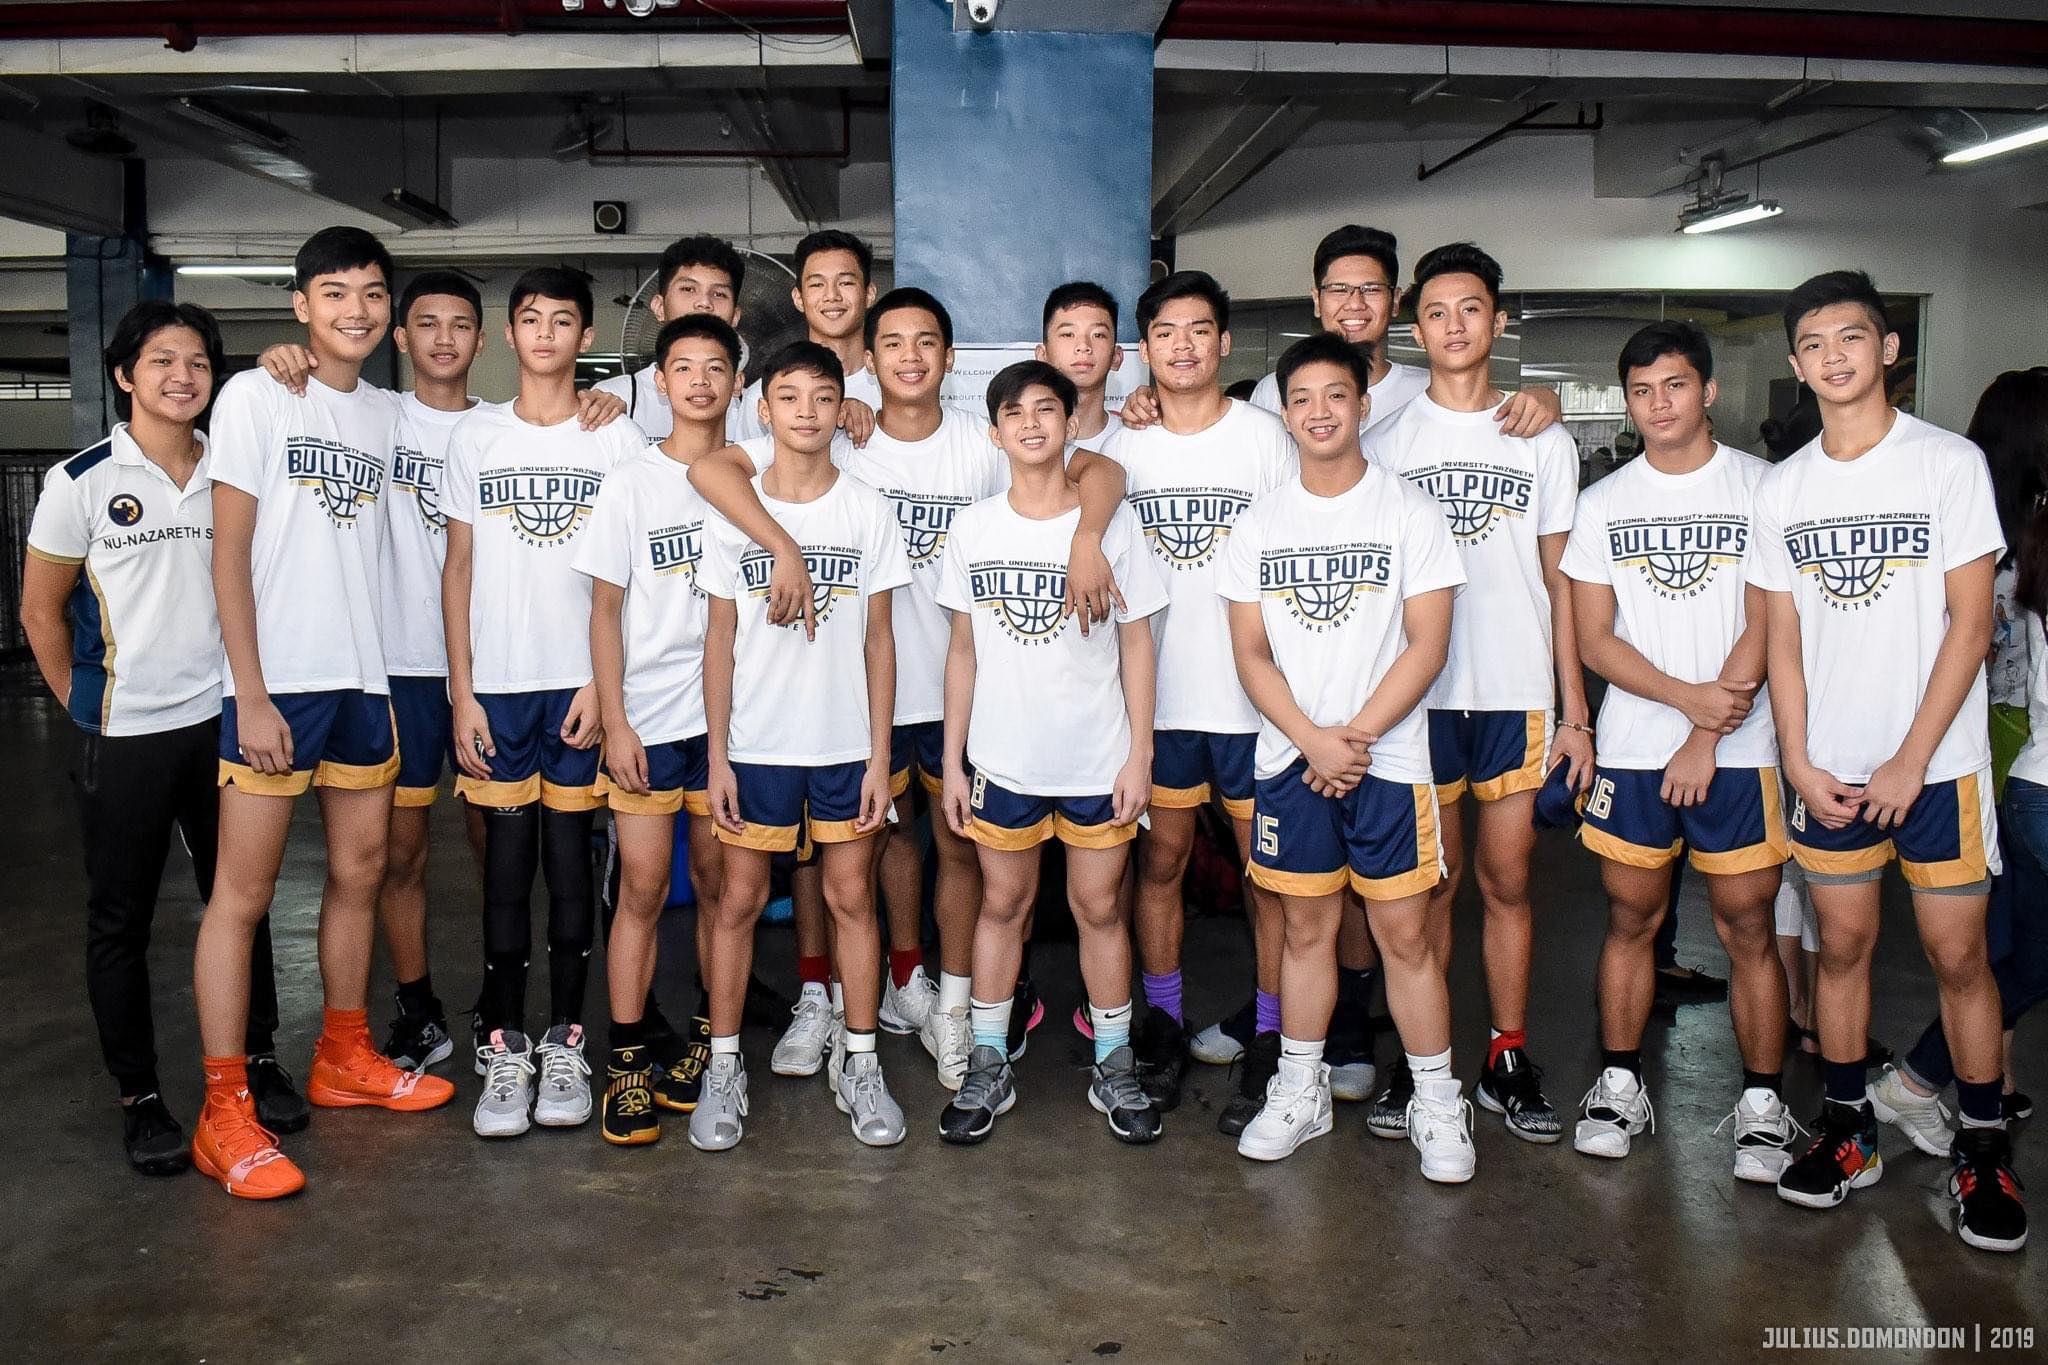 2020-NU-Bullpups Bo endorses UP's Gold as UPIS head coach Basketball News UAAP UP  - philippine sports news